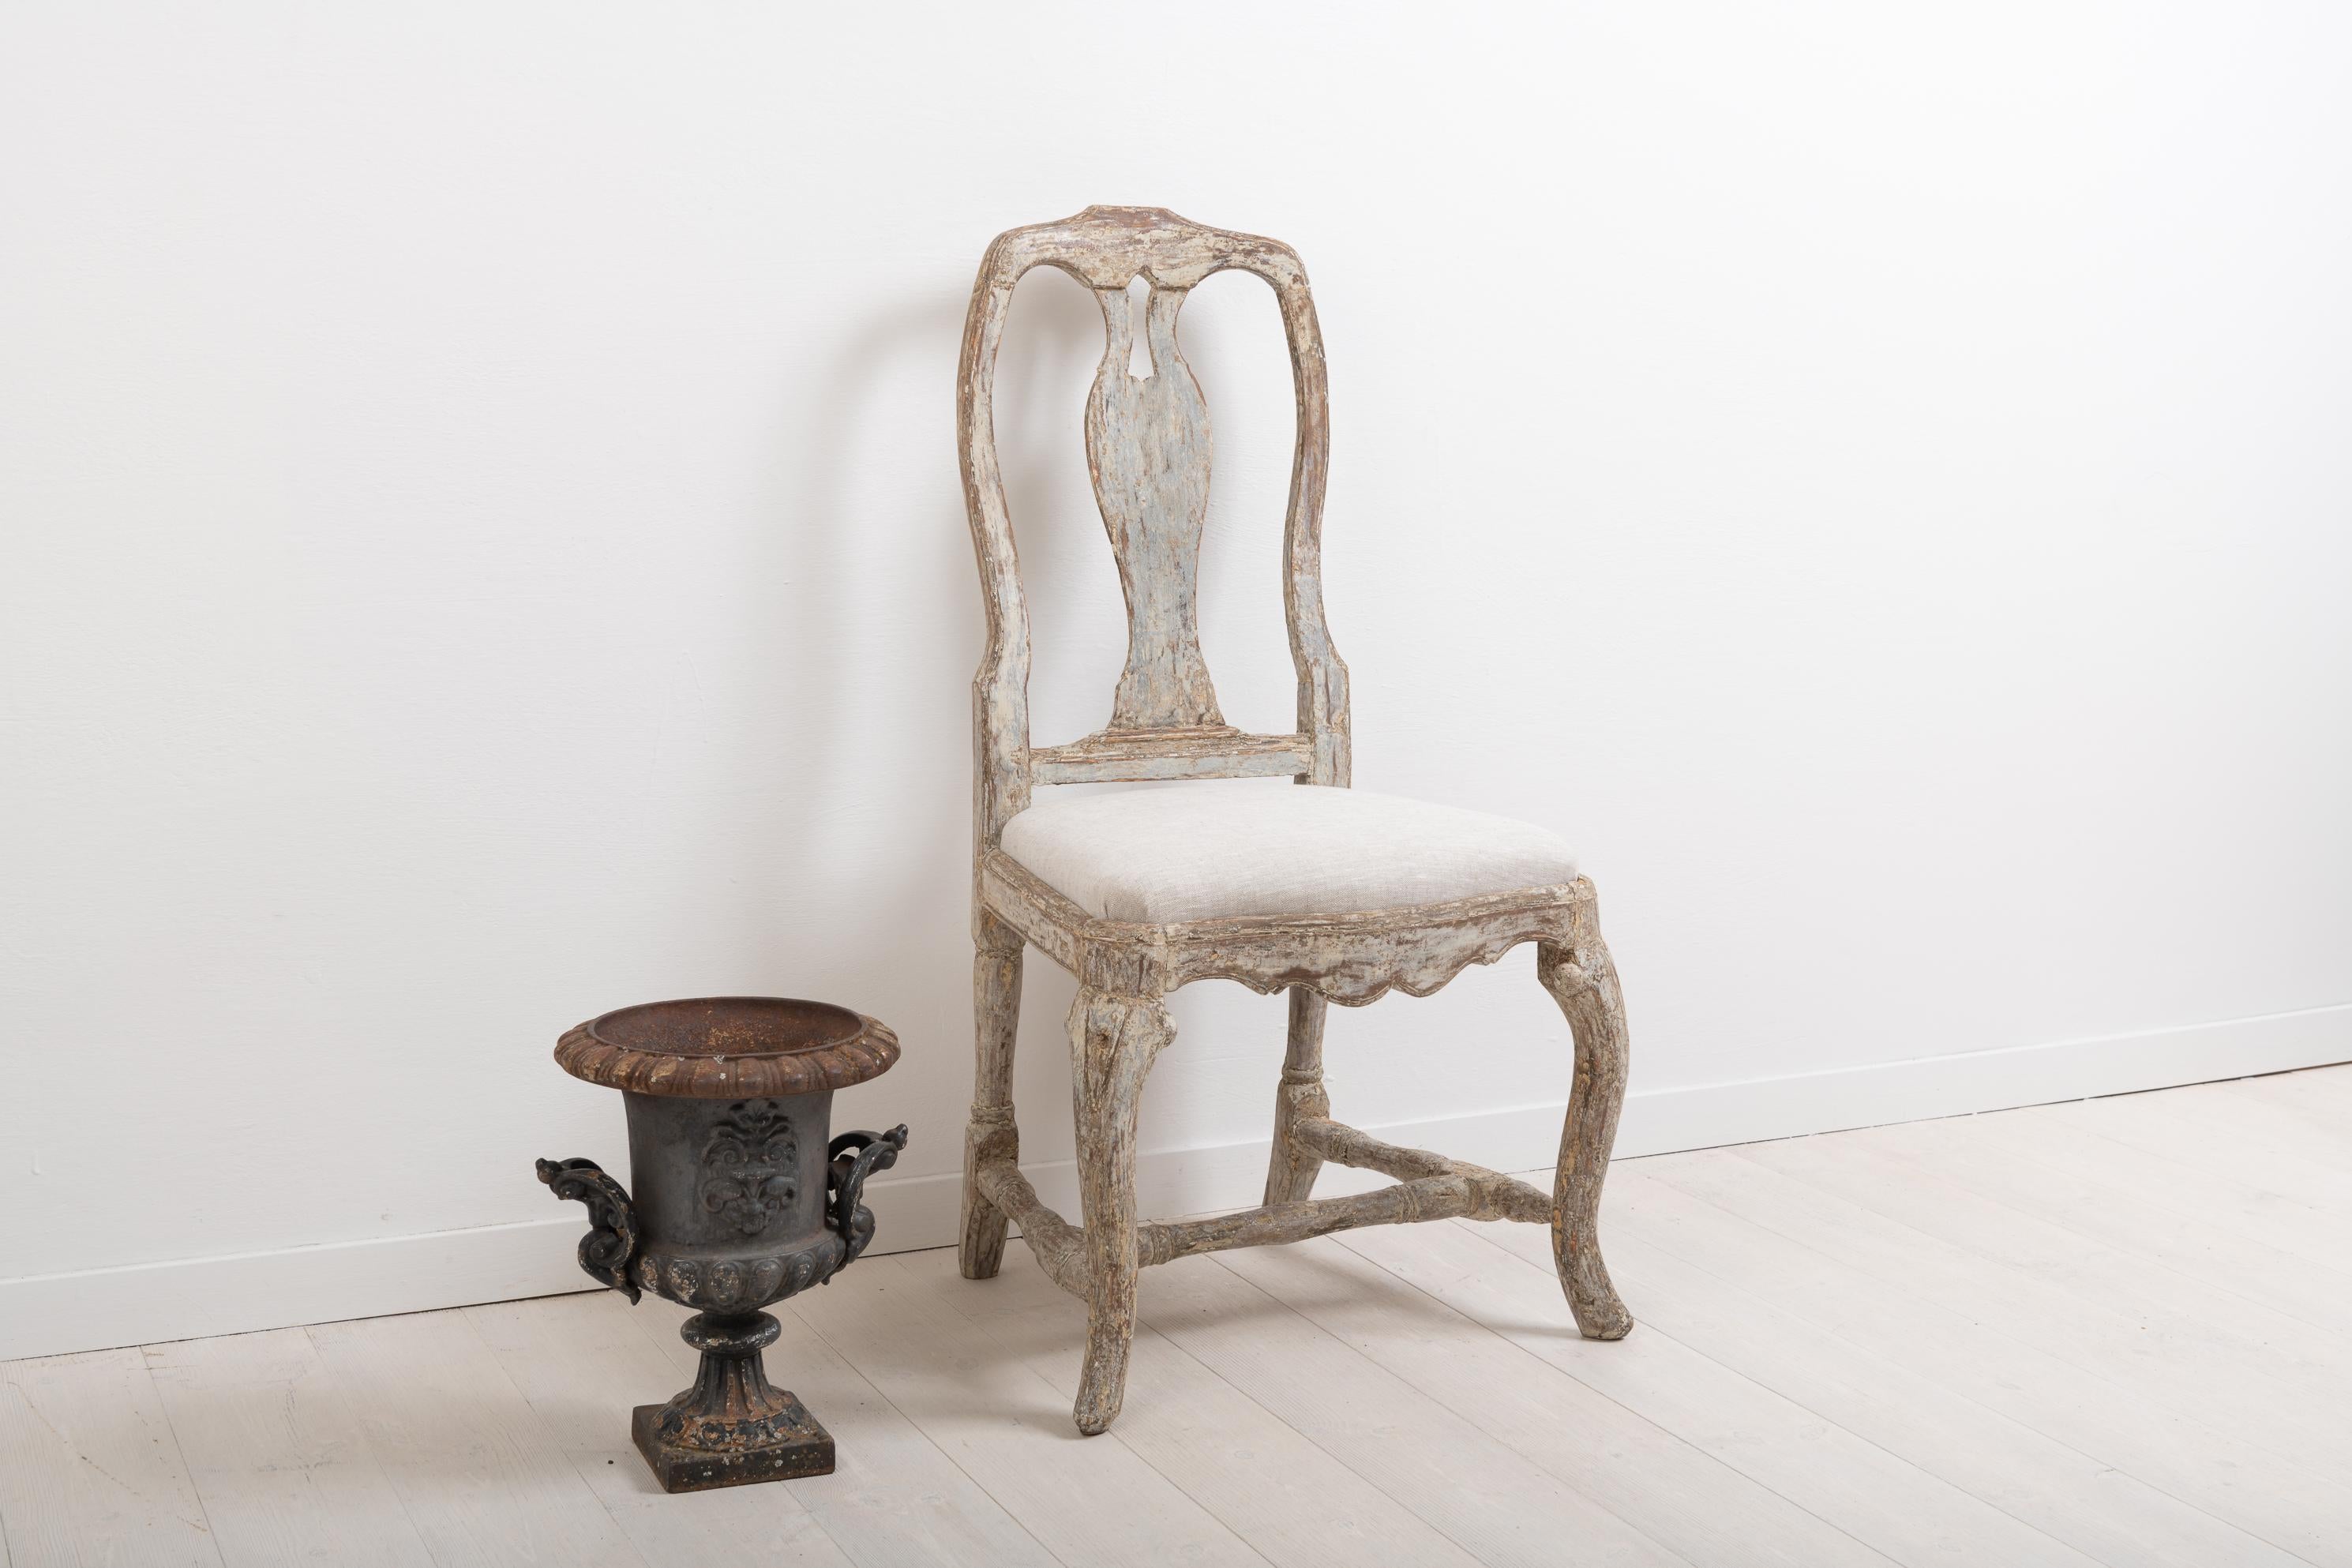 Antique Rococo chair from northern Sweden. The chair was manufactured circa 1770 during the Rococo period. Traces of the original paint with a rustic surface and patina to match. The seat is original and has been renovated with new upholstery in